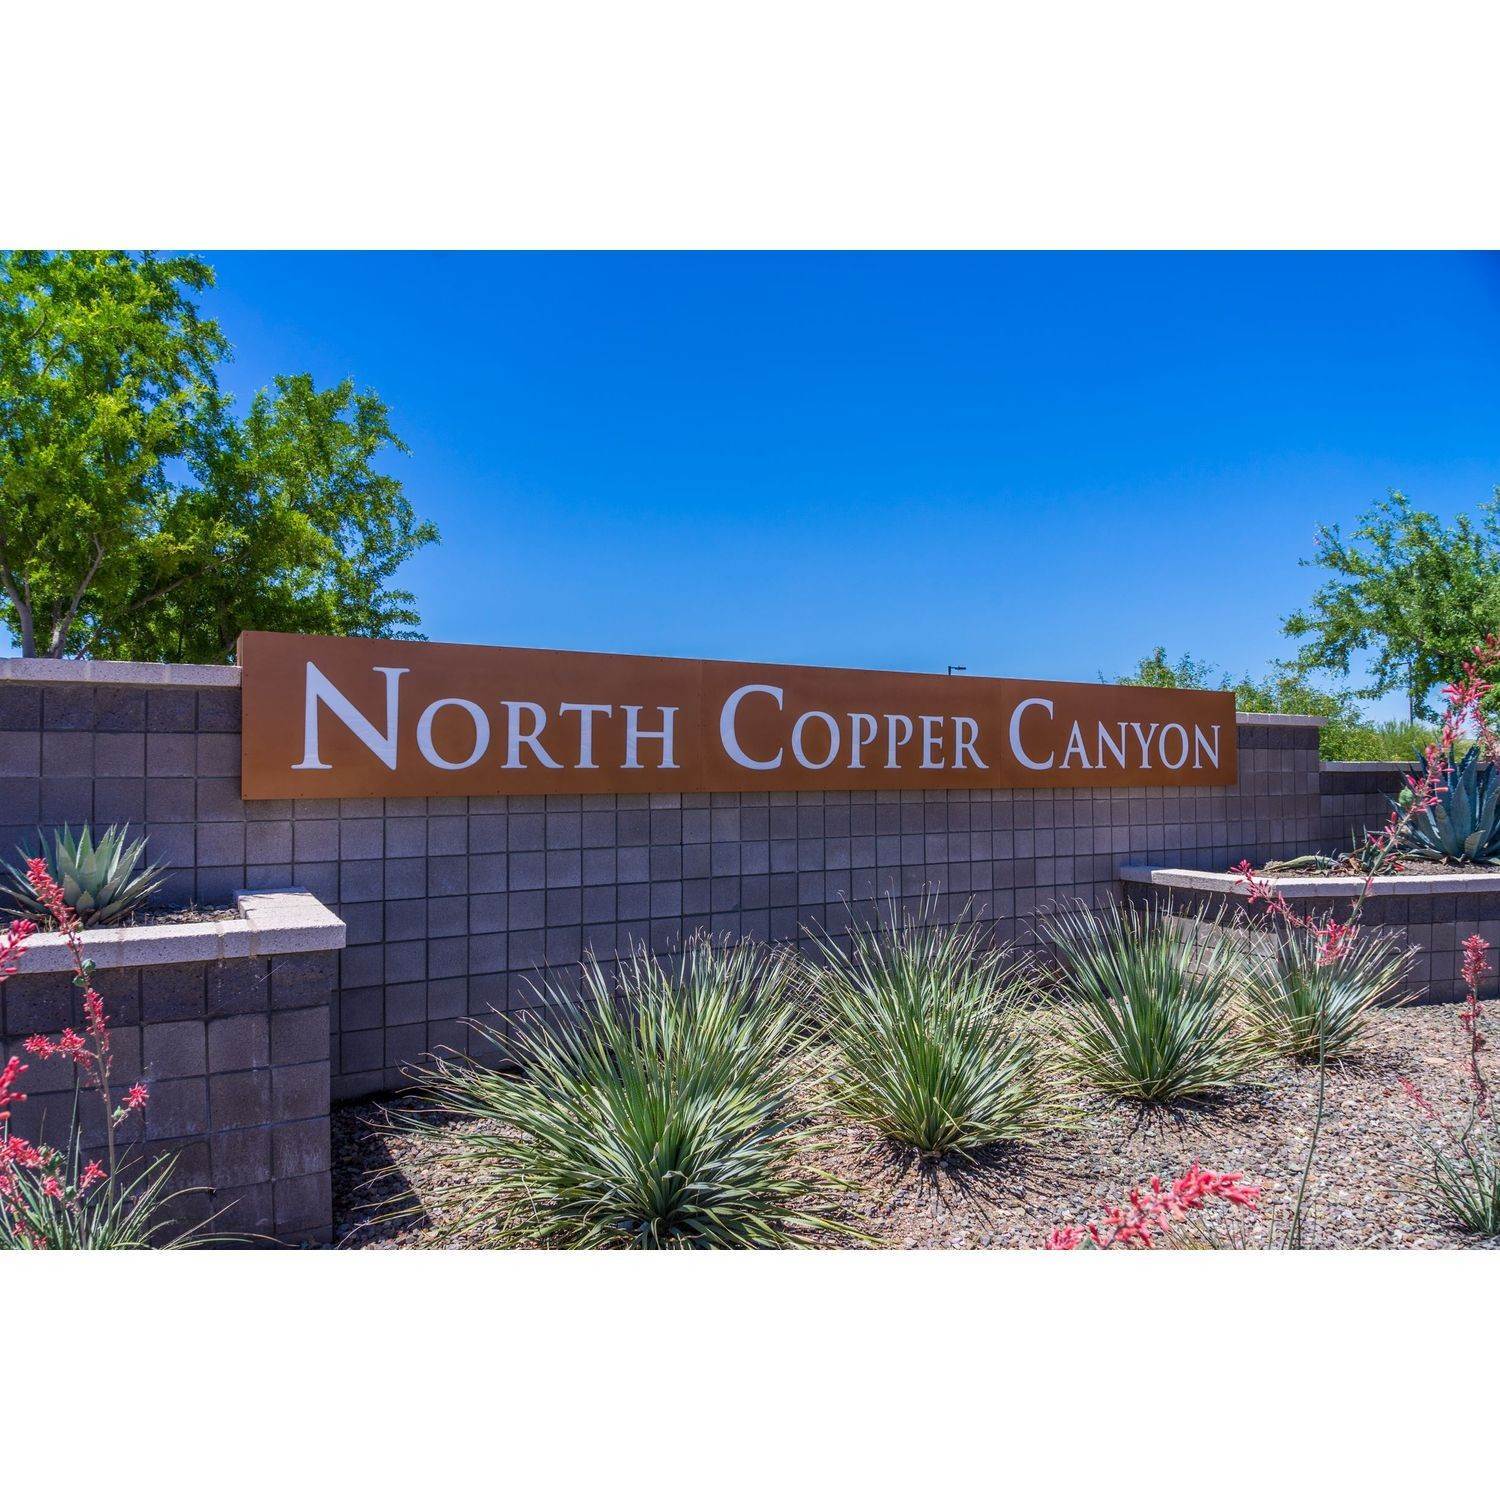 North Copper Canyon building at 17723 W Country Club Terrace, Surprise, AZ 85387